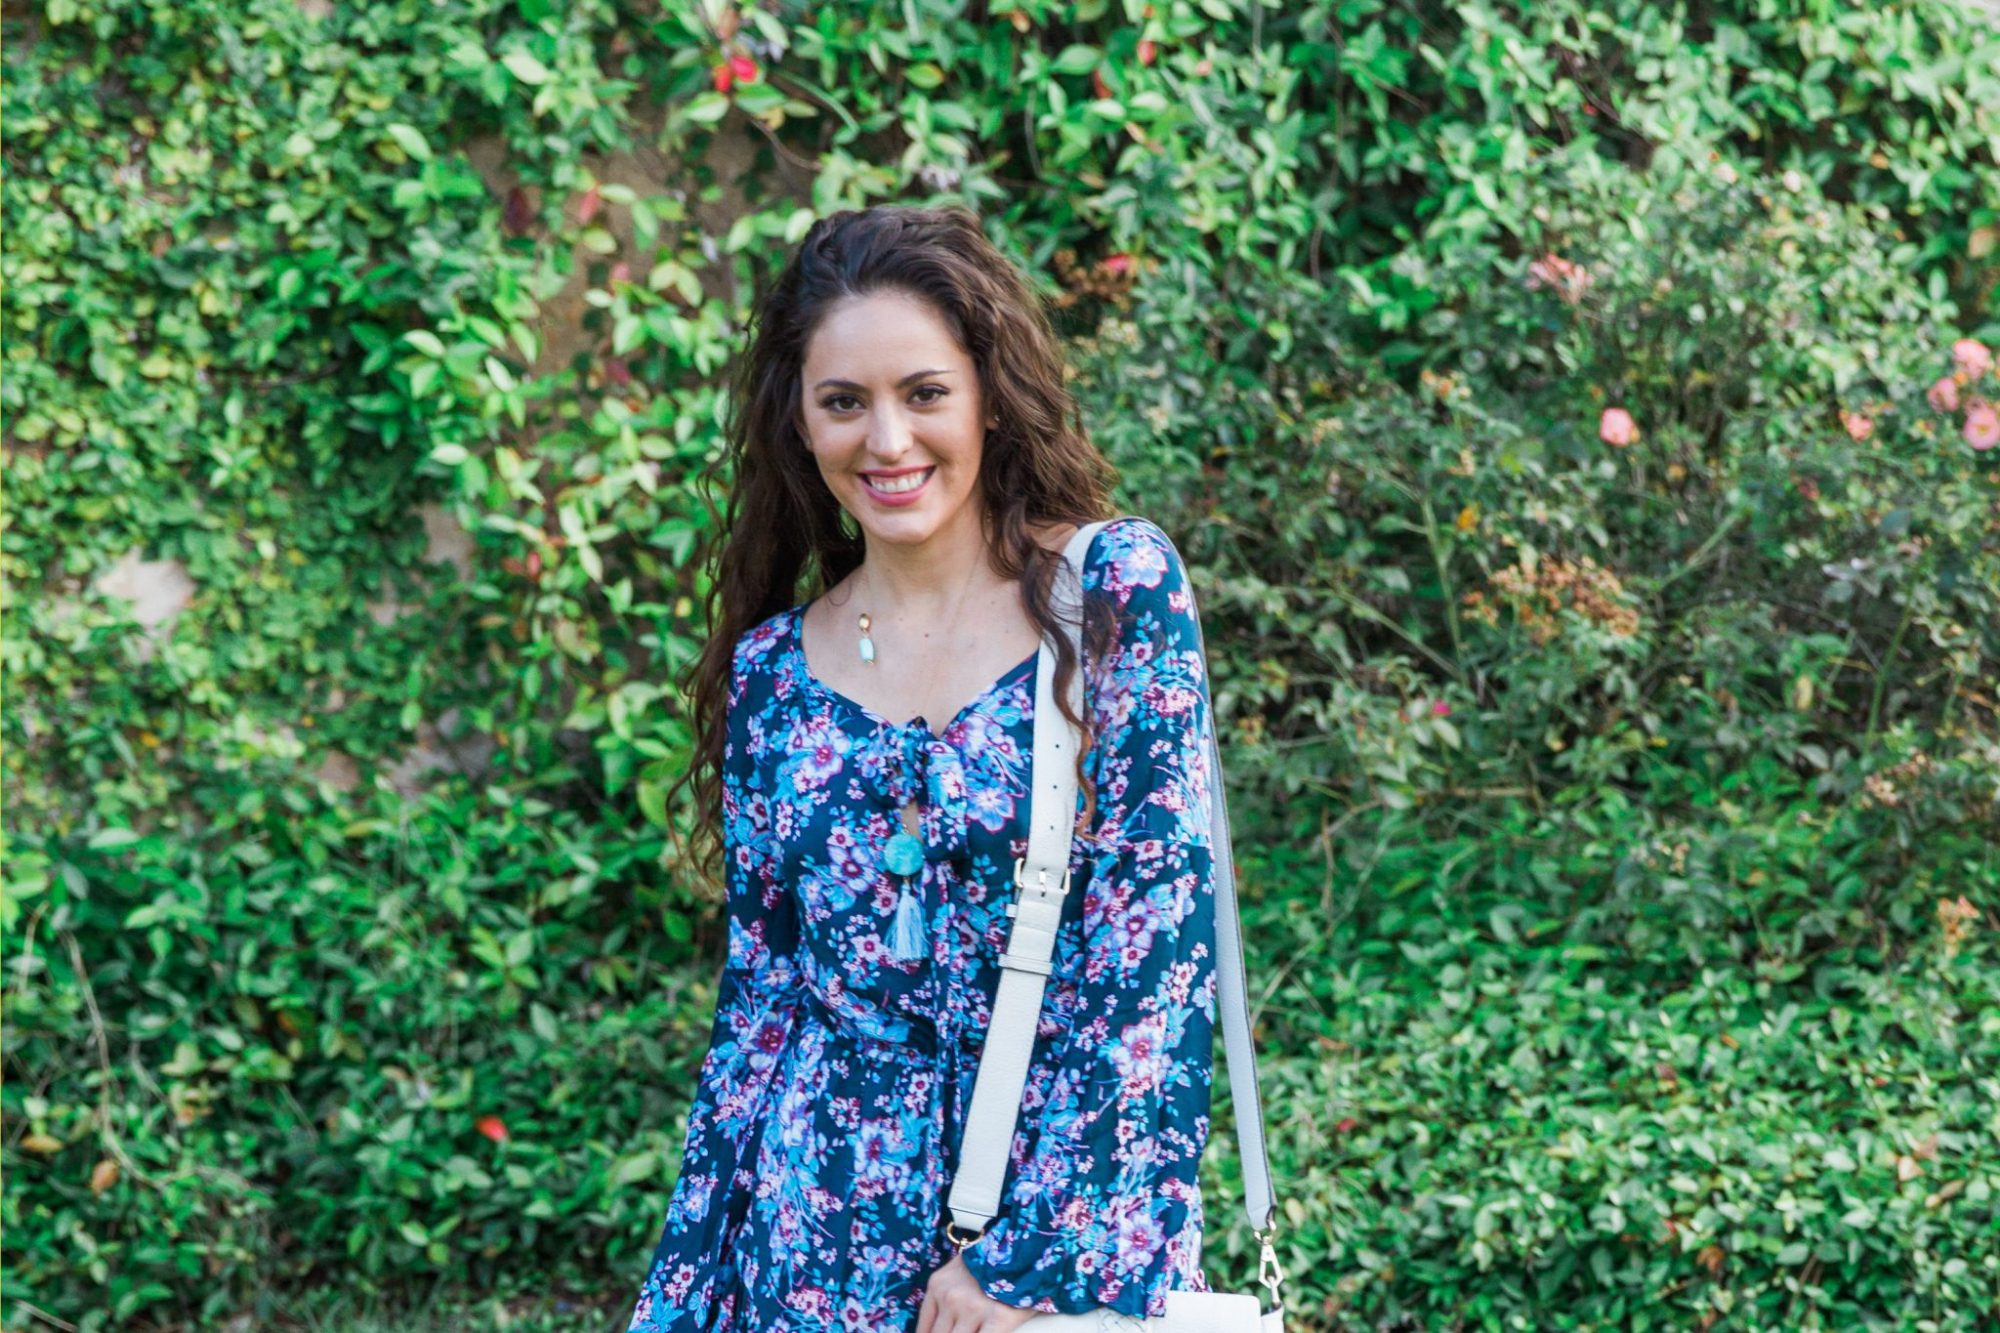 floral romper, summer to fall transition outfit, coral wedges, rebecca minkoff white tassel crossbody, seasonal transition outfit ideas, how to style a romper for fall, how to style a romper for summer